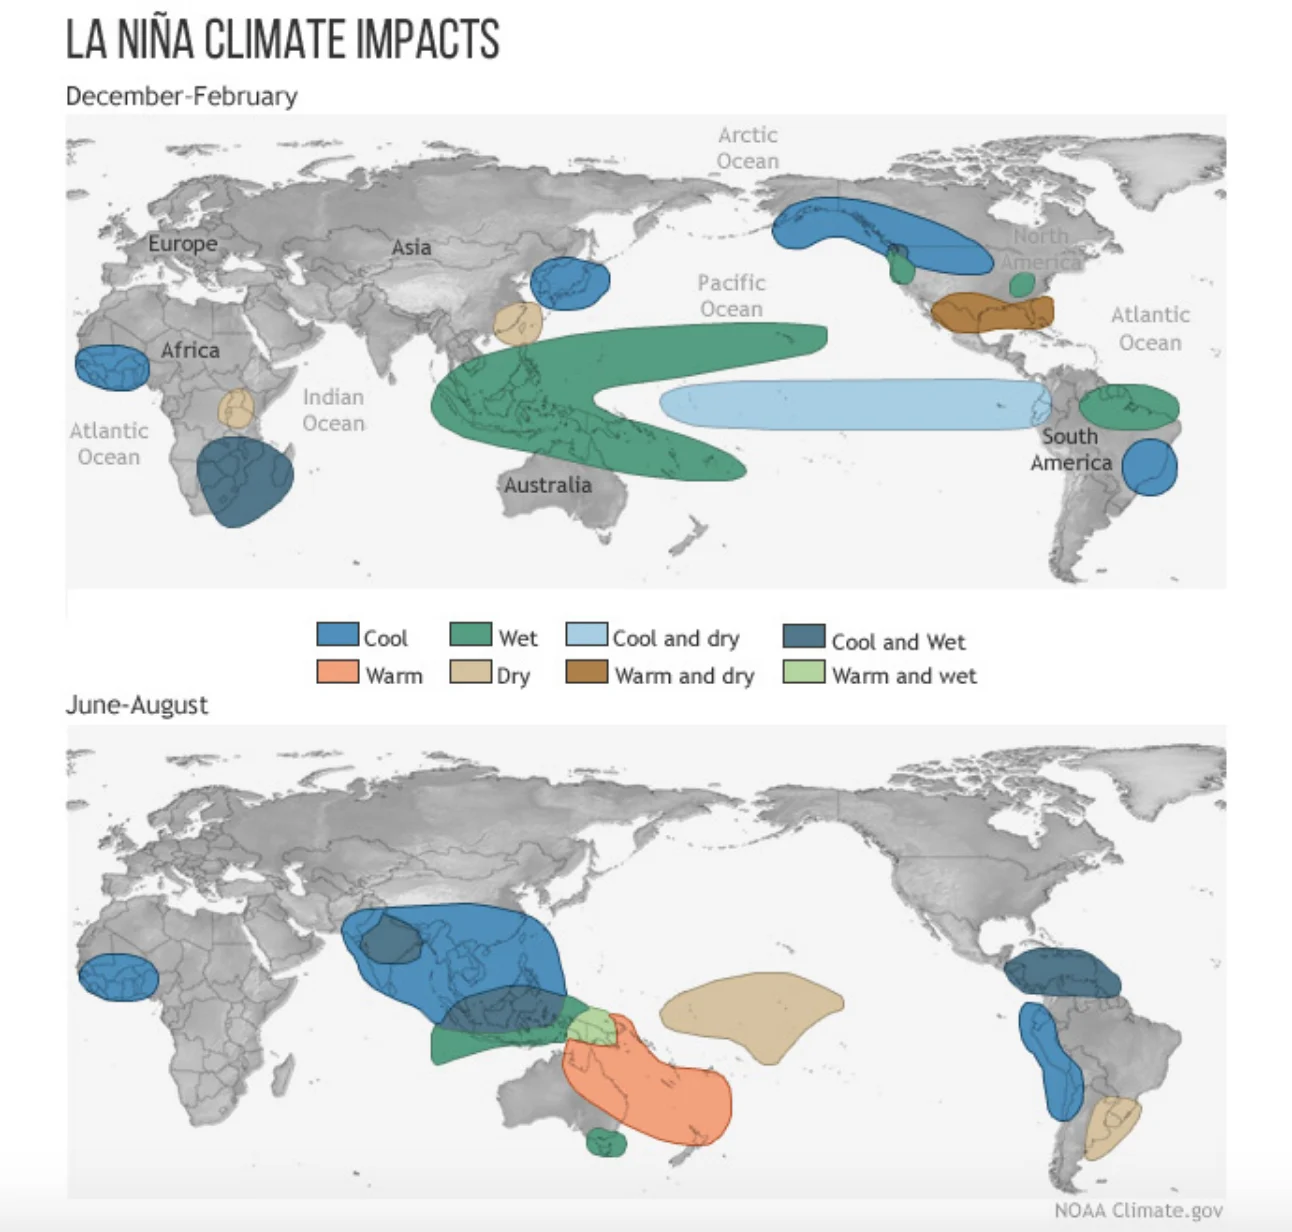 Typical impacts of La Niña on the world during Northern Hemisphere winter and summer. Credit: Climate.gov